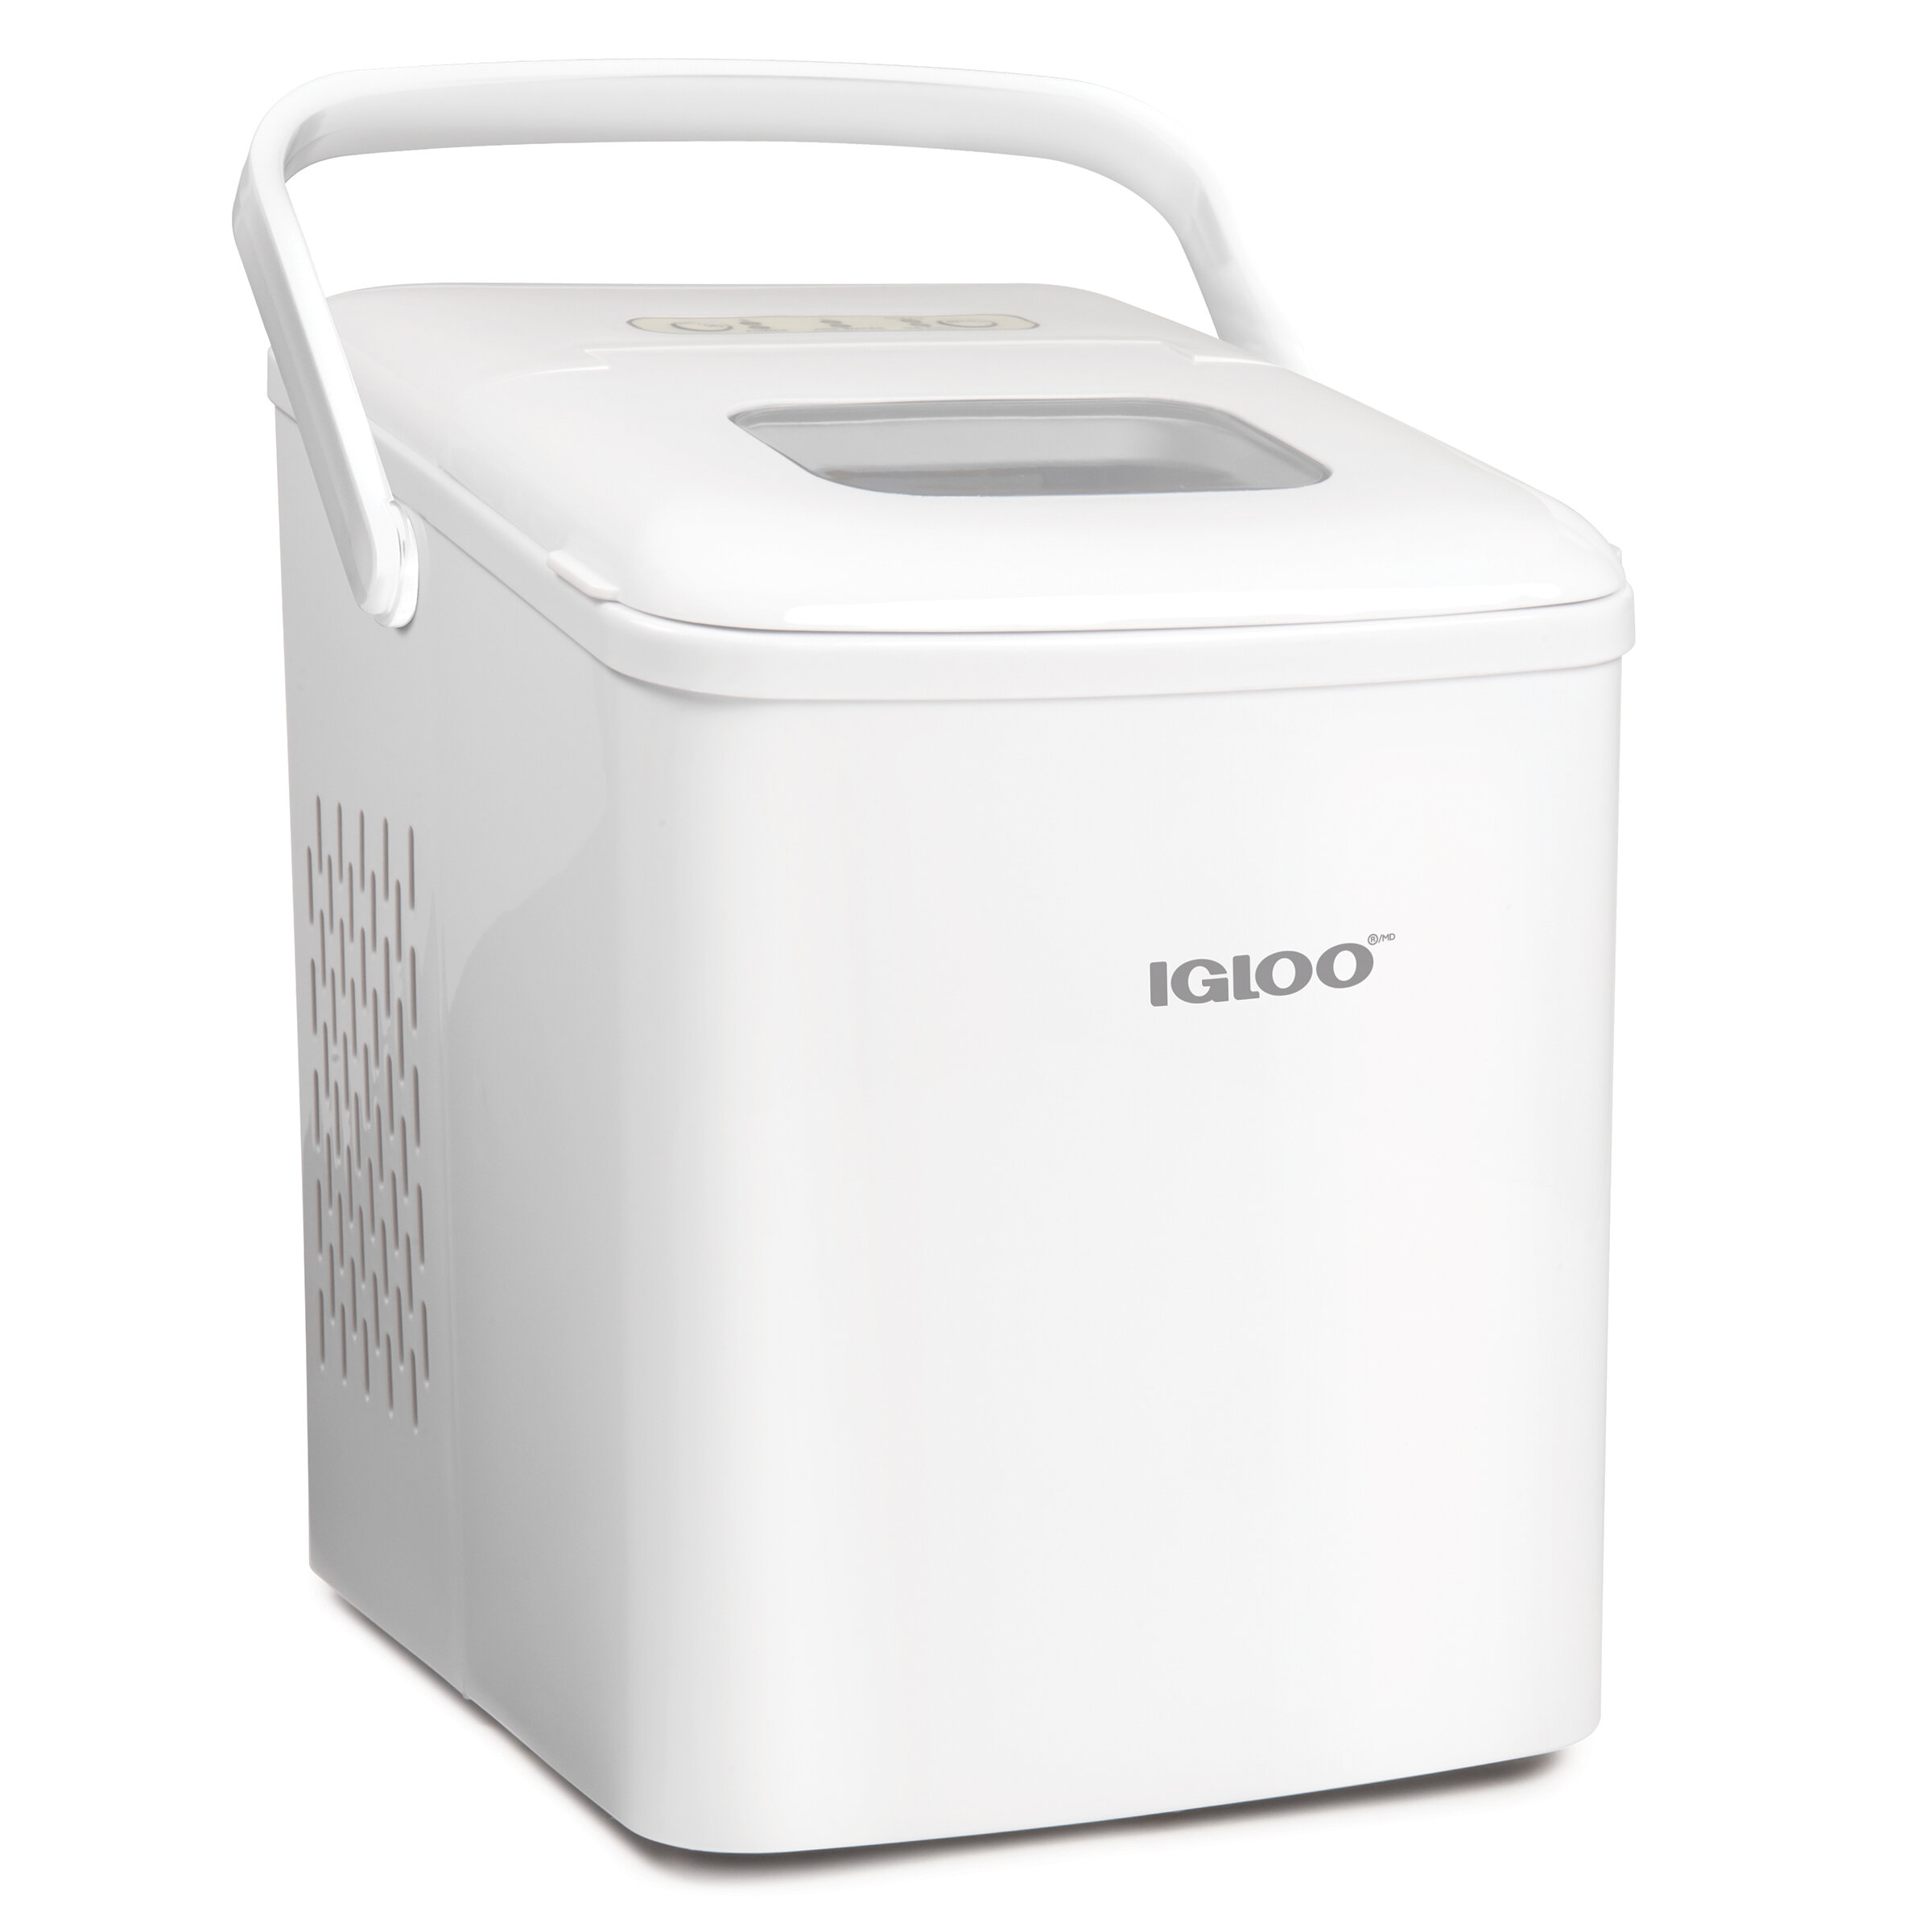 Igloo 26 Pound Automatic Self Cleaning Portable Countertop Ice